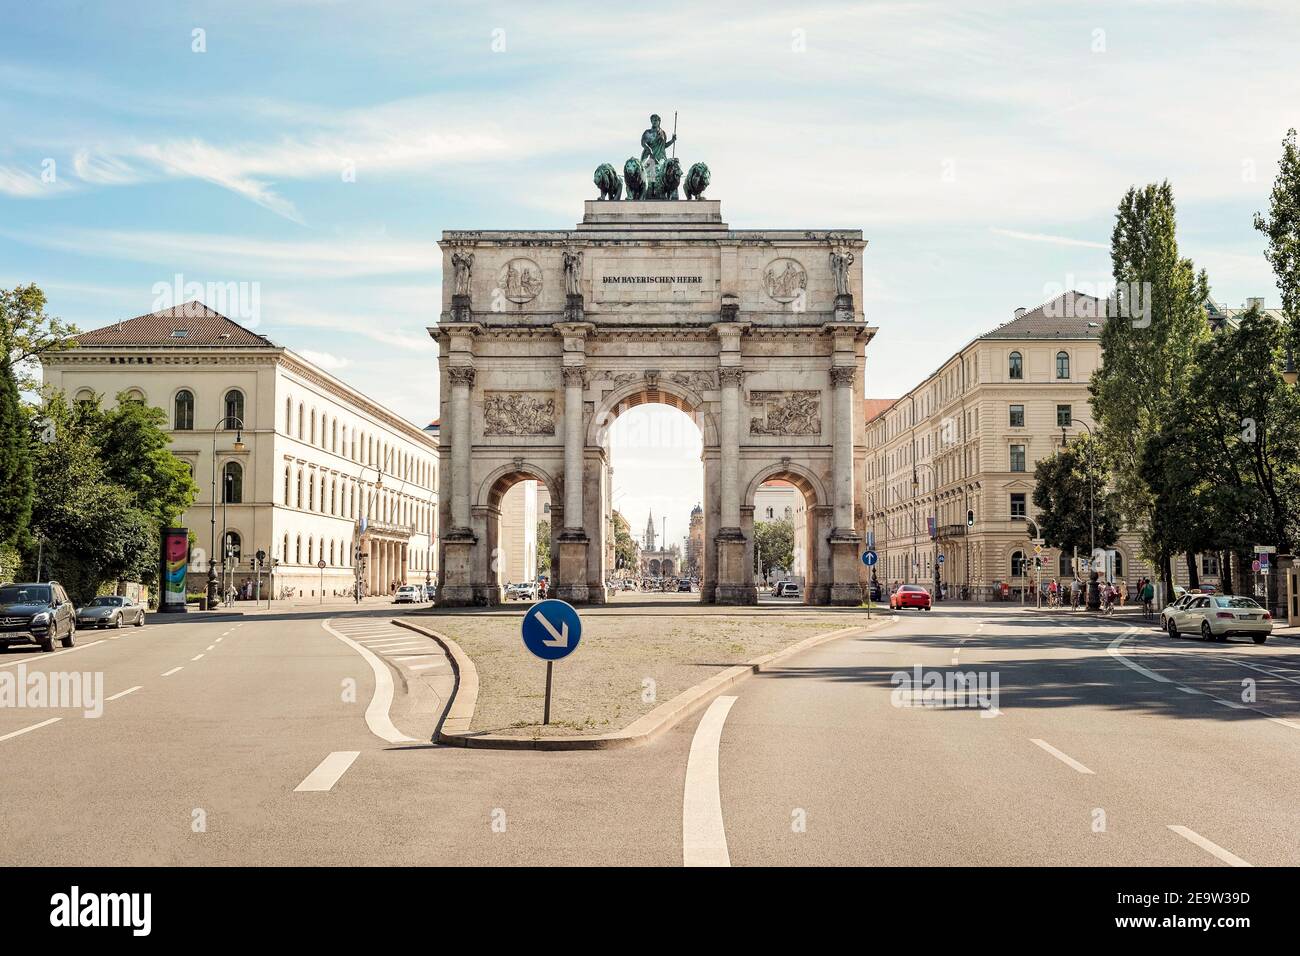 Munich-Germany, August 8, 2019: The Siegestor (Victory Gate) is an impressive triumphal arch in Munich. On the top you can see a lion-quadriga with Ba Stock Photo